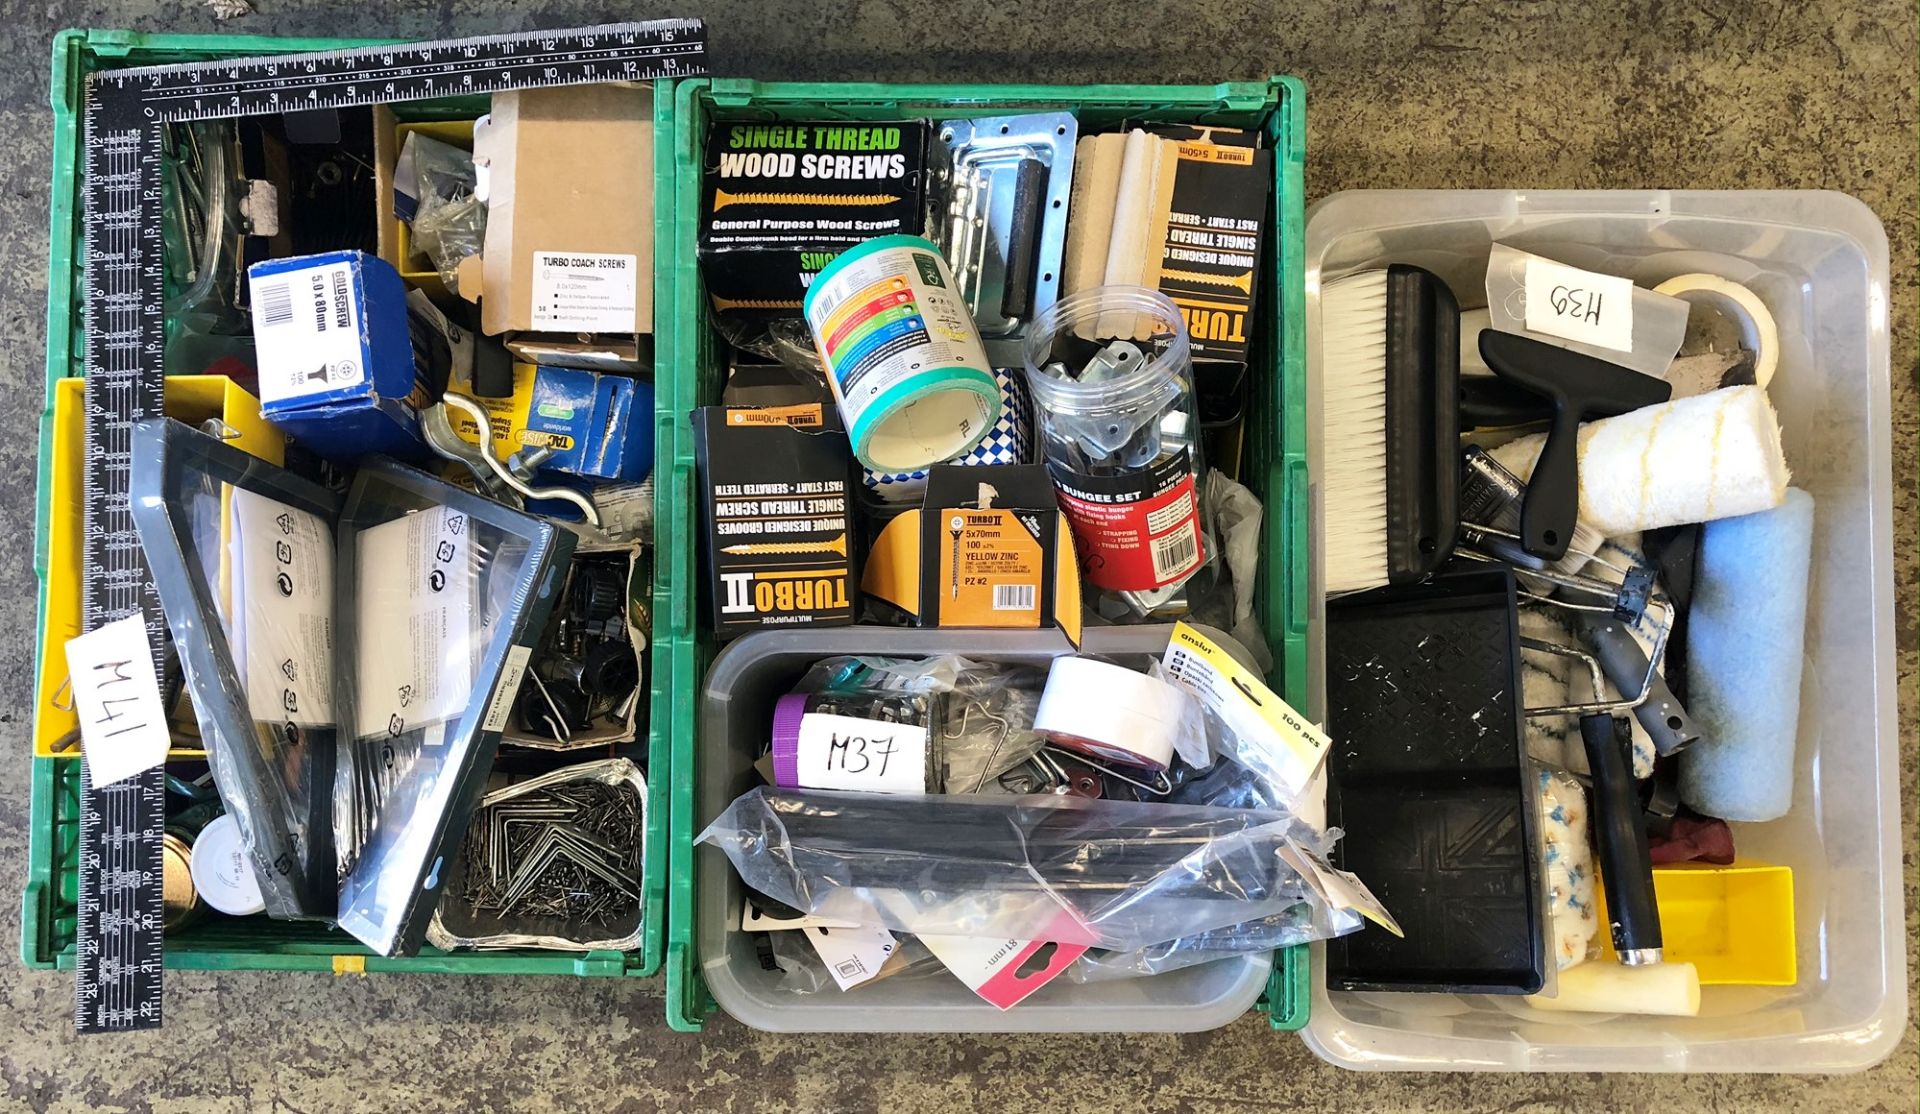 Quantity of Hardware Supplies - As Pictured